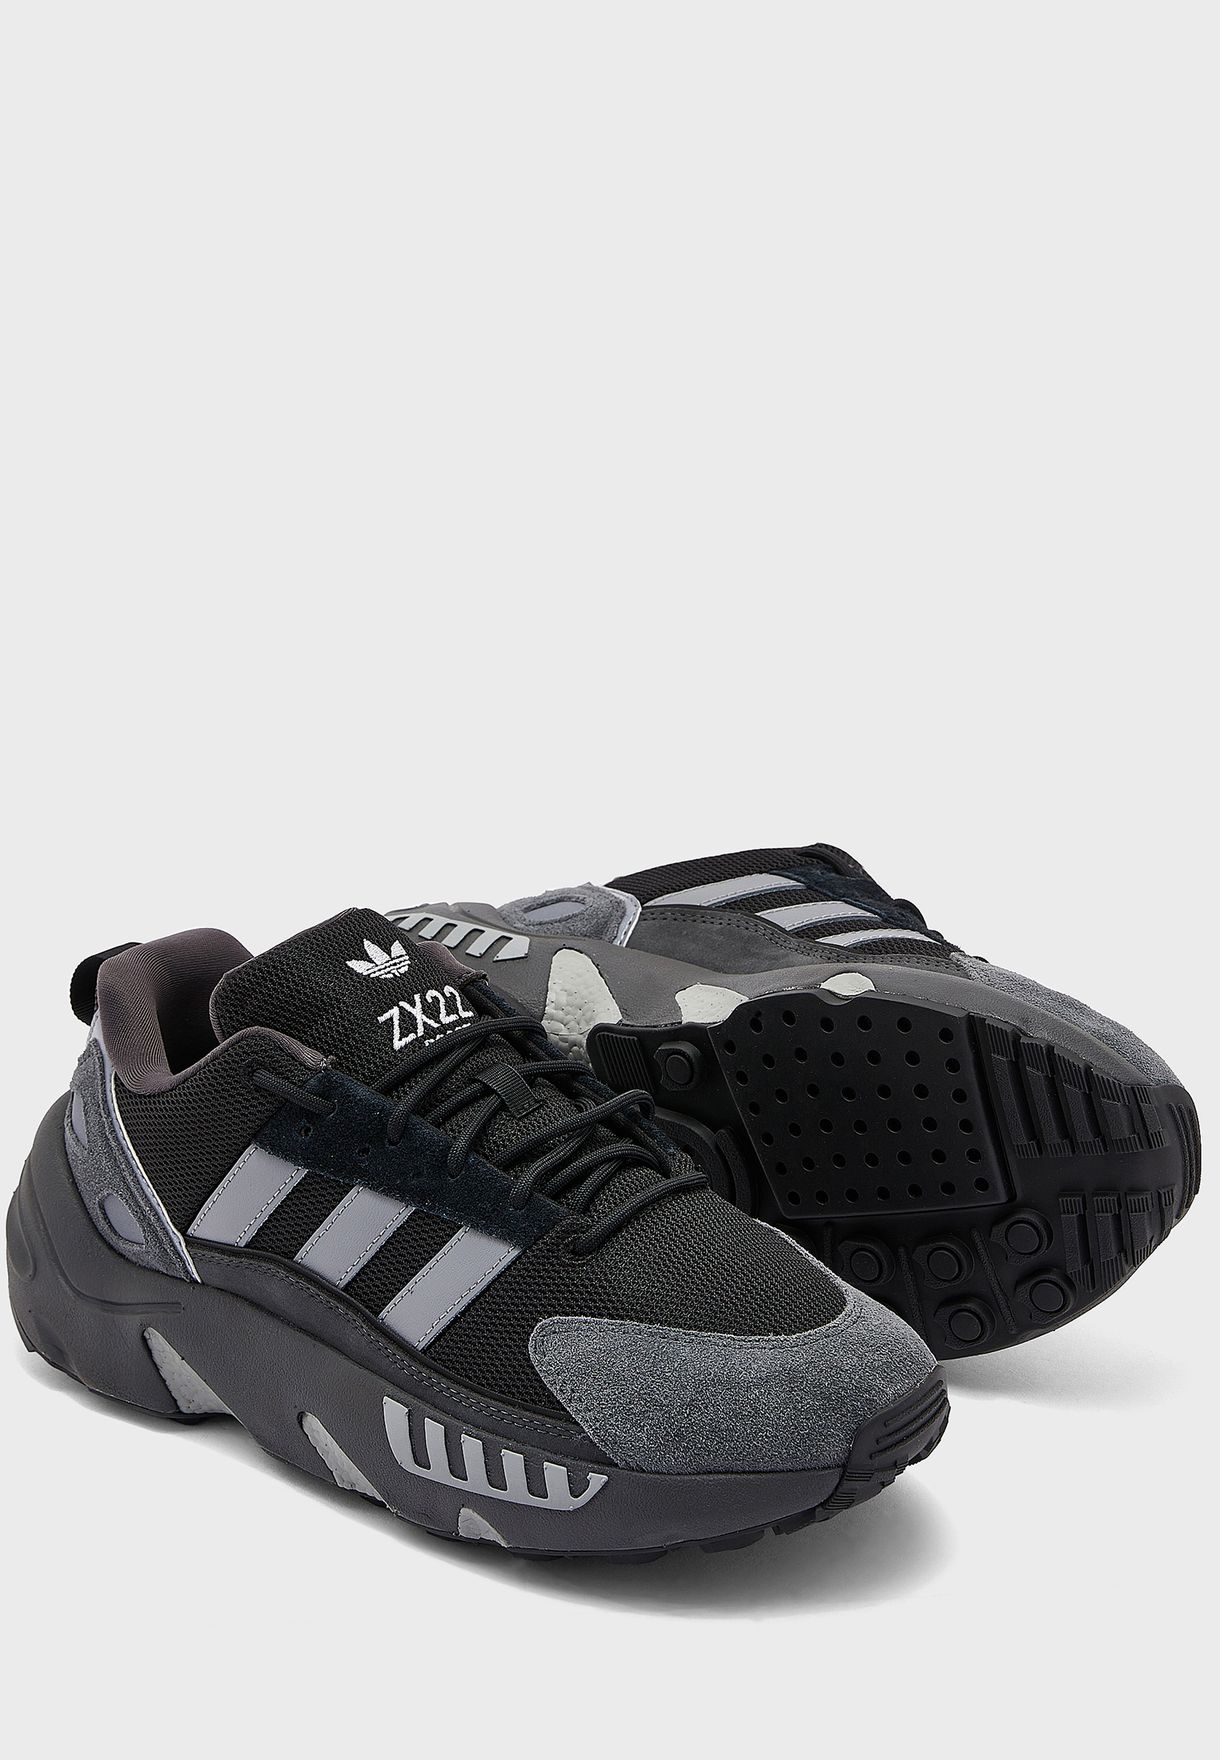 Zx 22 Boost